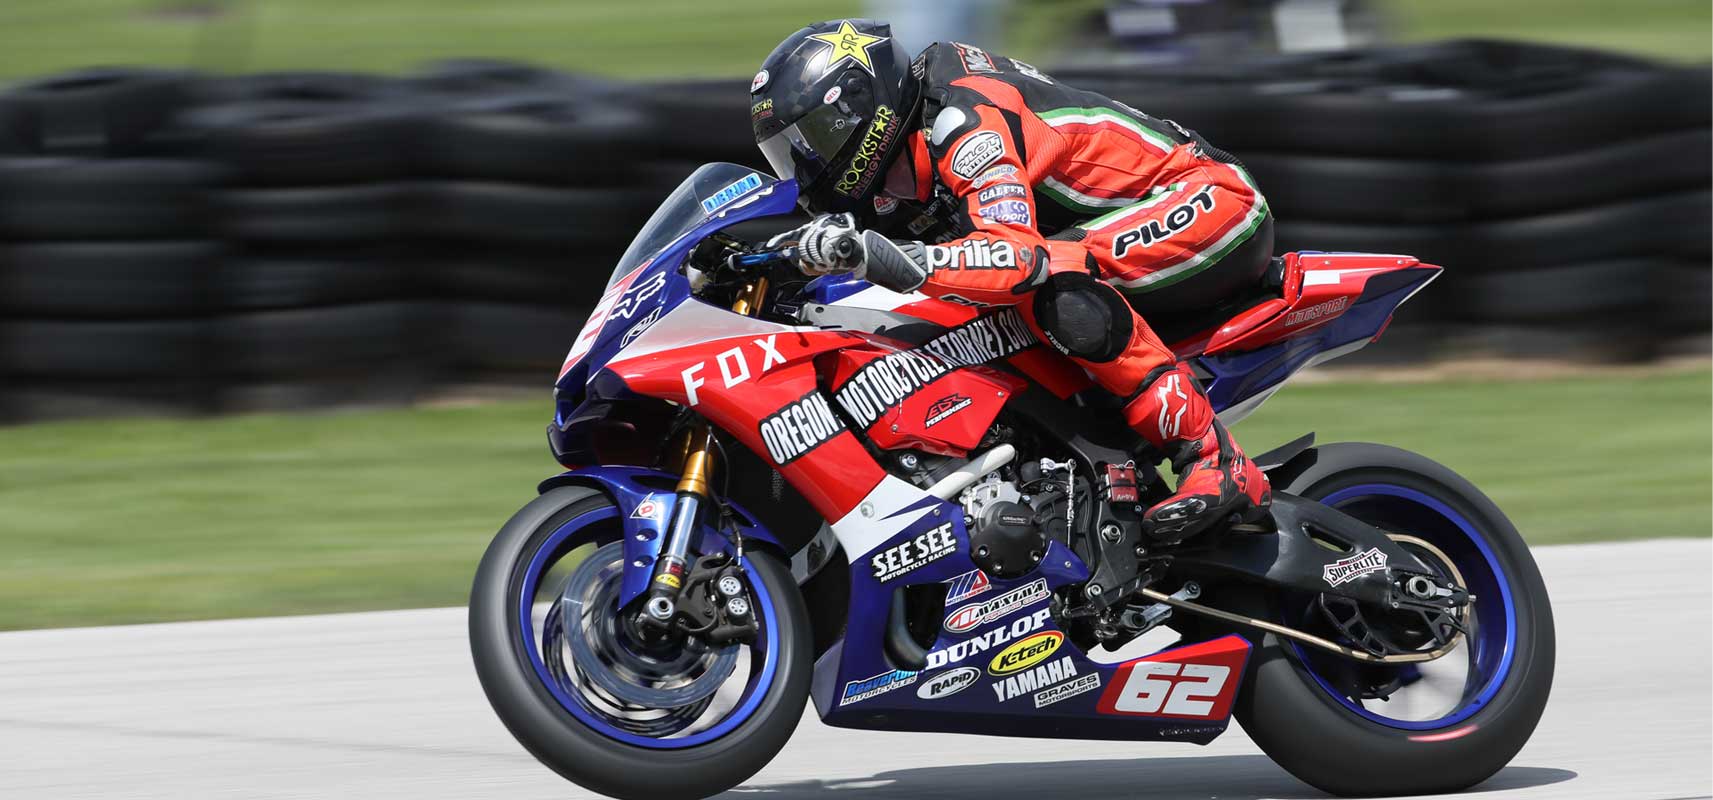 Andy DiBrino riding tight and aerostreamed ripping down the track MotoAmerica Wisconsin on his EDR Performance R1 - maybe a little wheelie but we'll have to ask Andy.